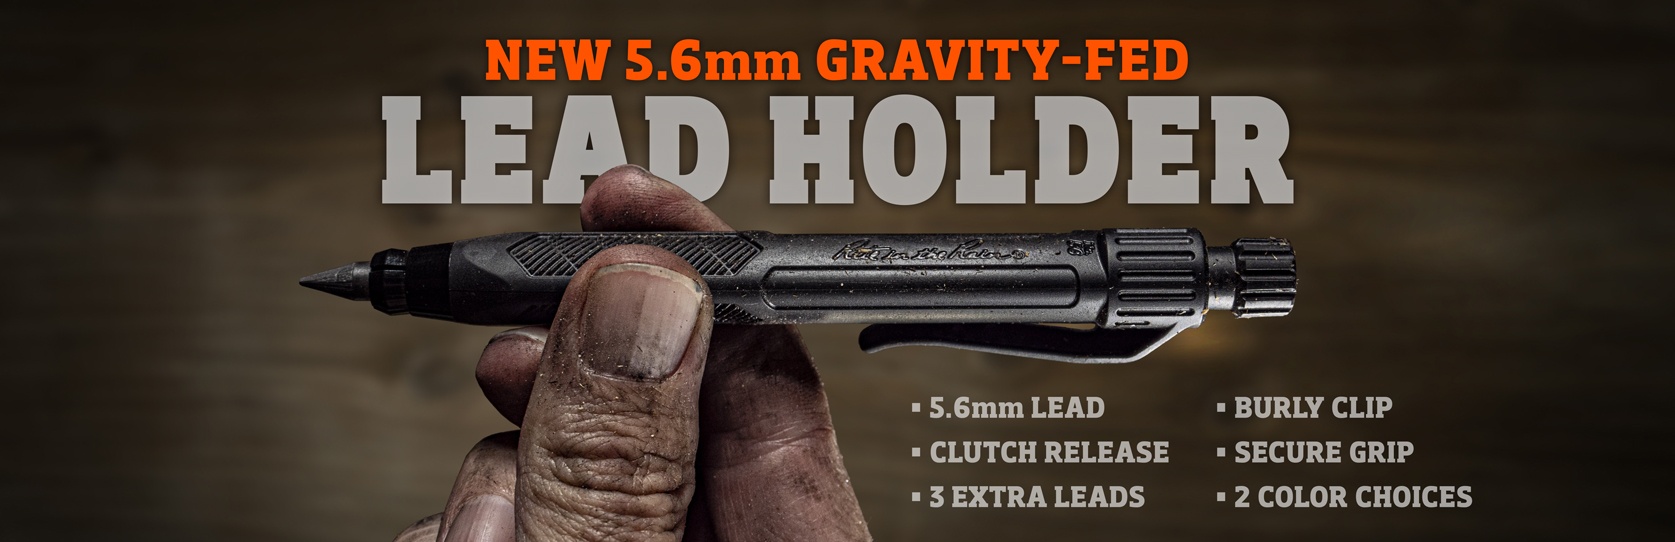 New 5.6mm gravity-fed lead holder. 5.6mm lead, clutch release, 3 extra leads, burly clip, secure grip, and 2 color choices.